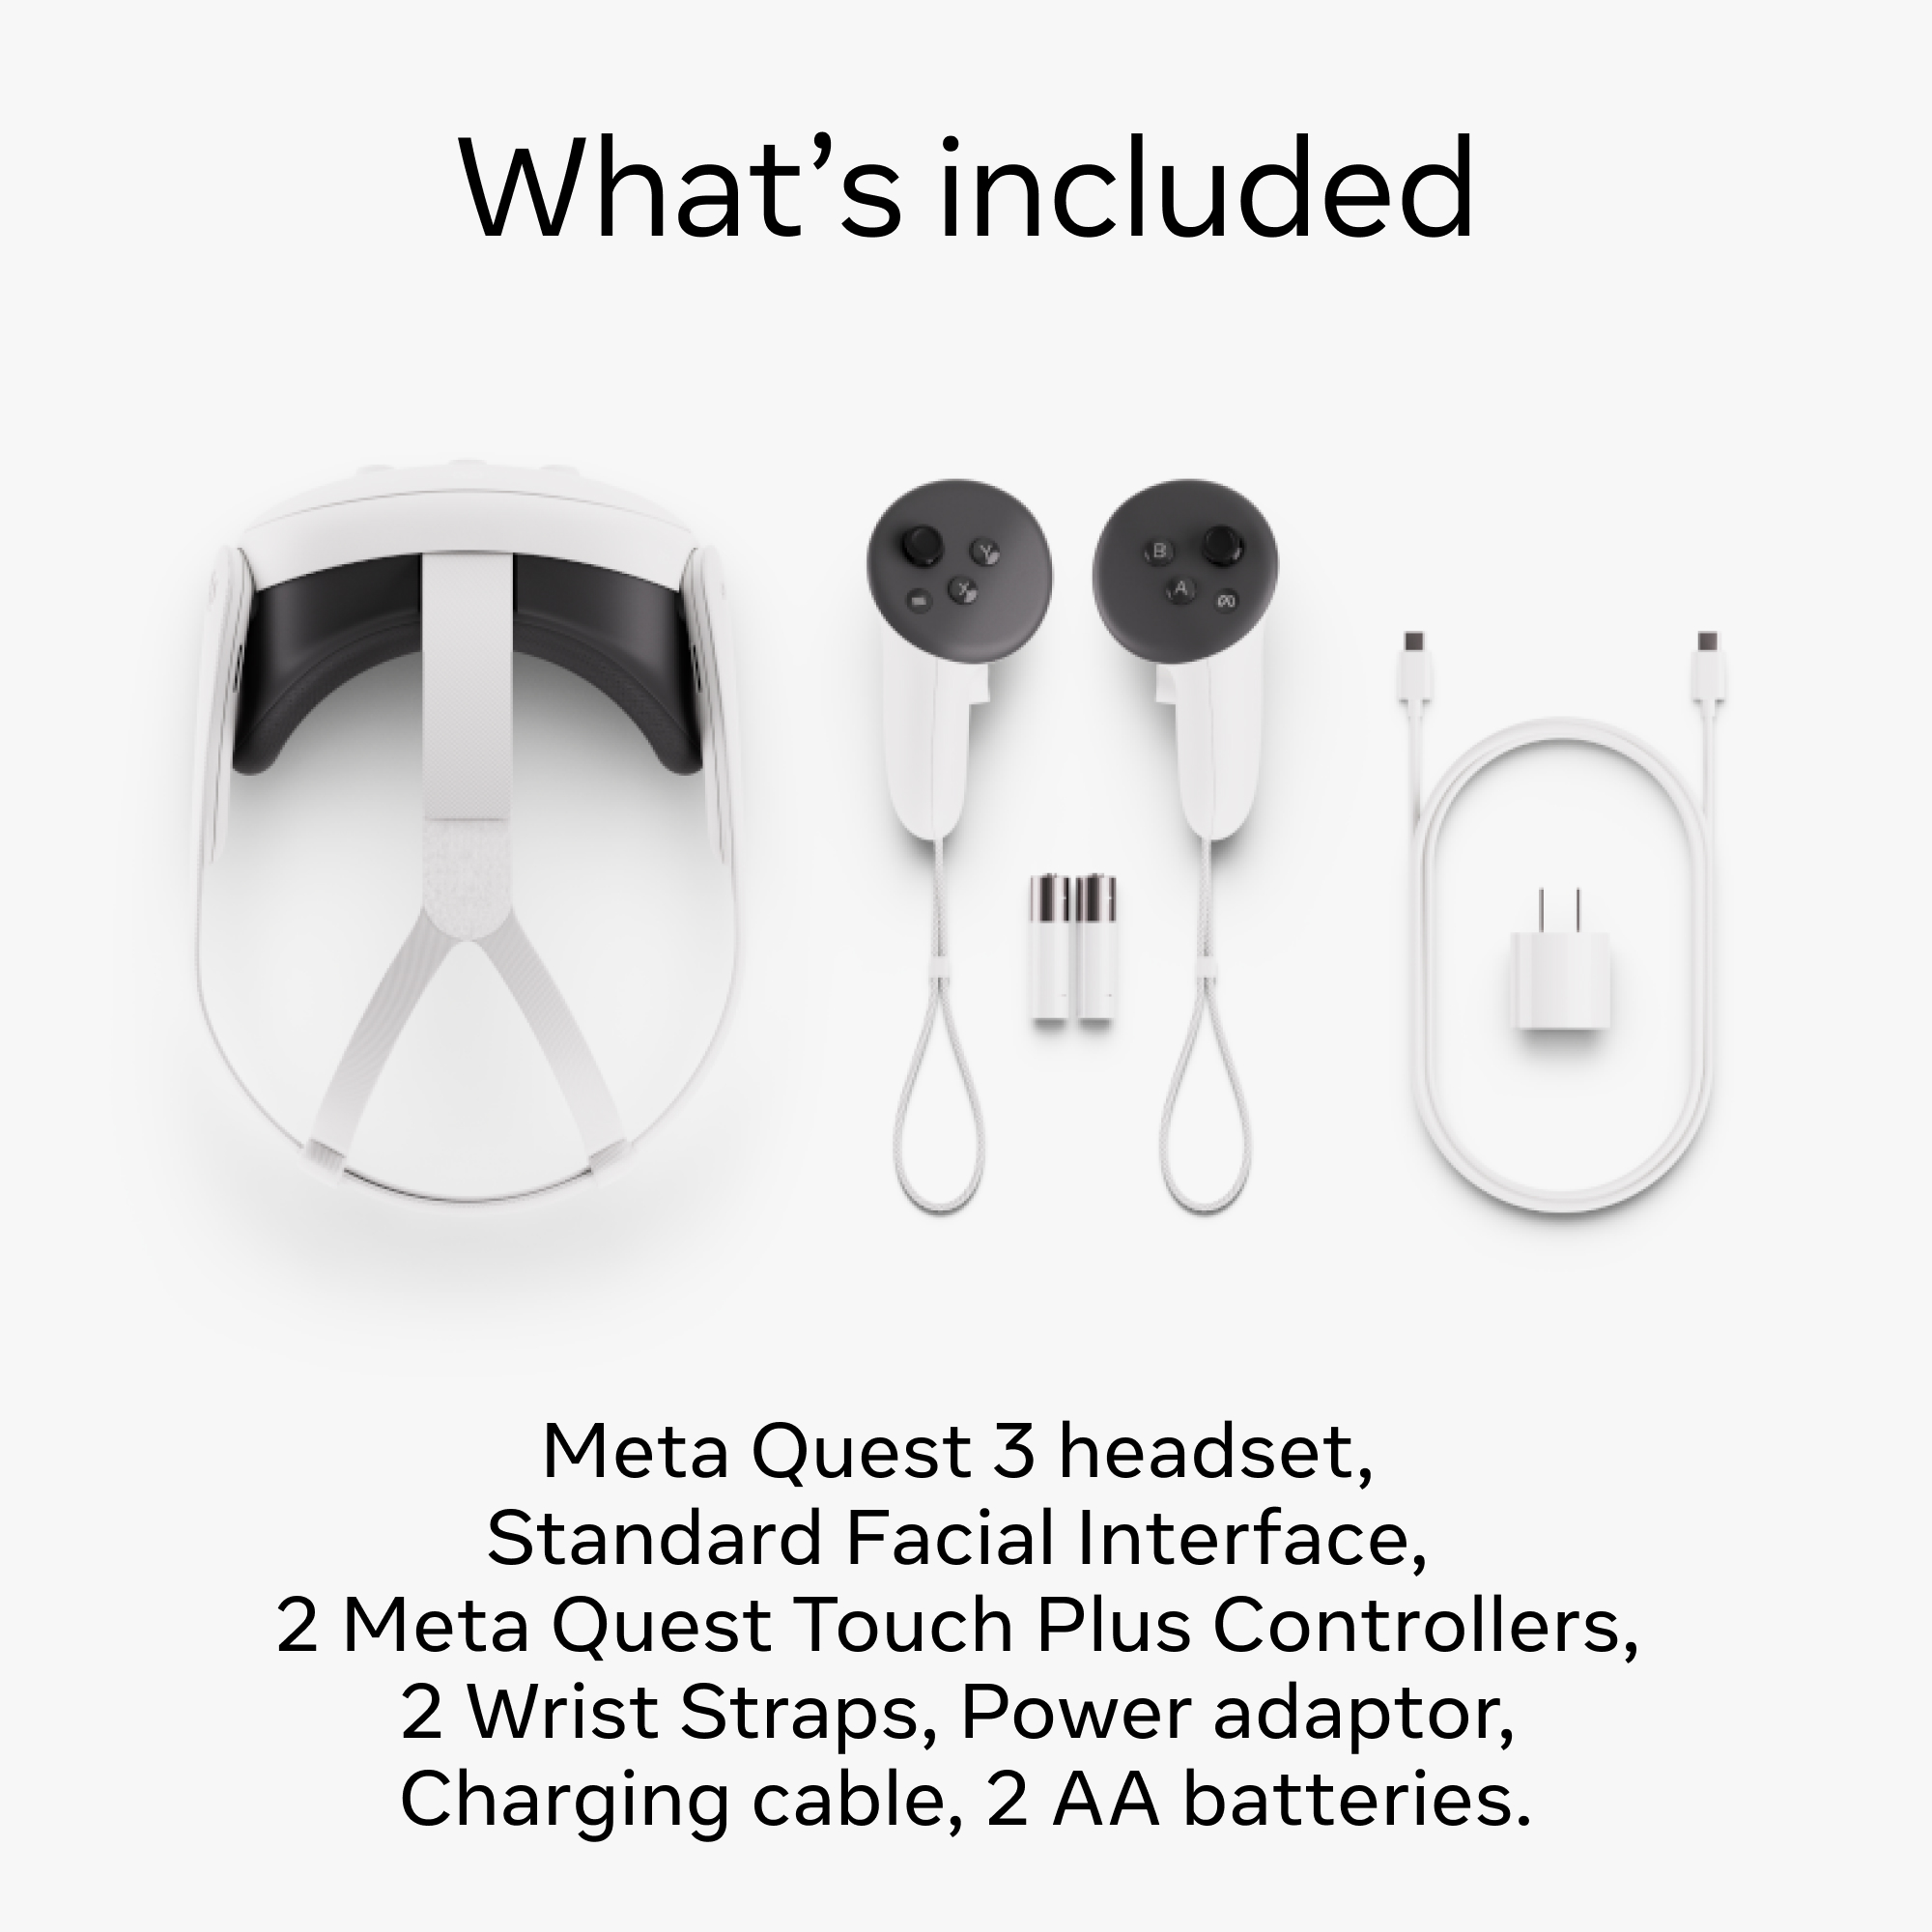 Meta Quest 3 All-in-One VR Headset - White (899-00579-01) for sale online